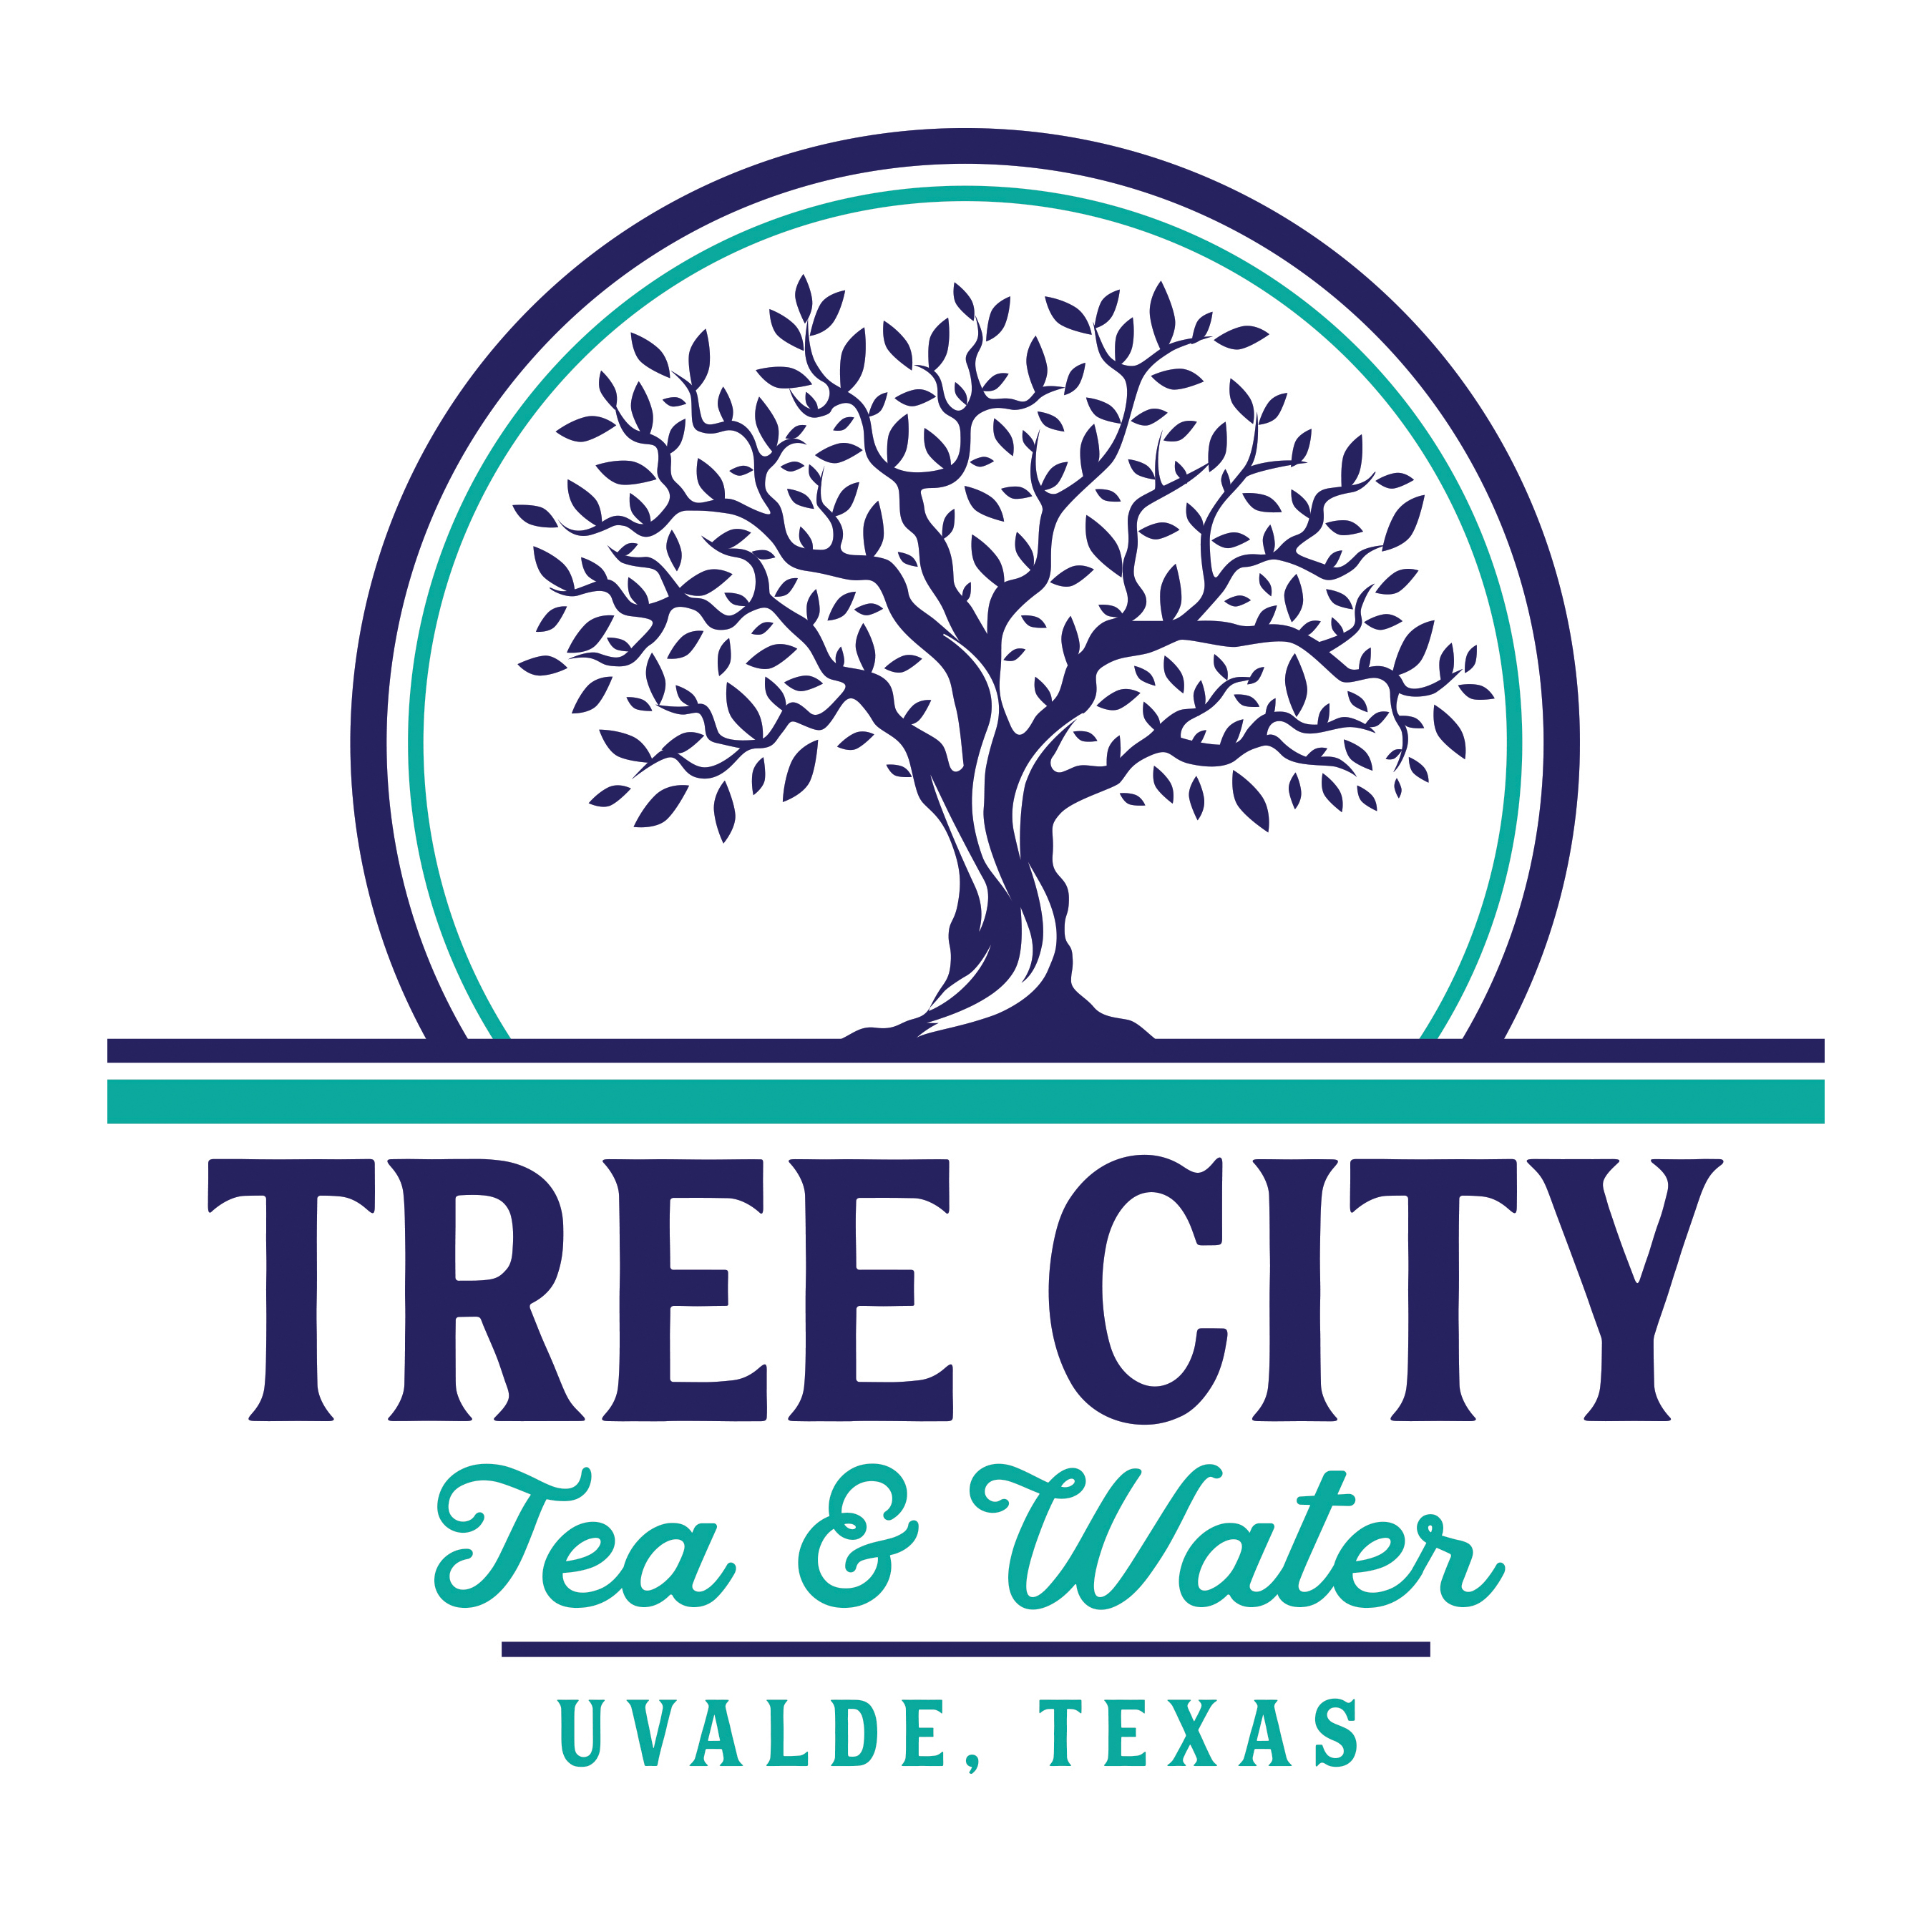 Art for Tree City Tea  & Water by Generic